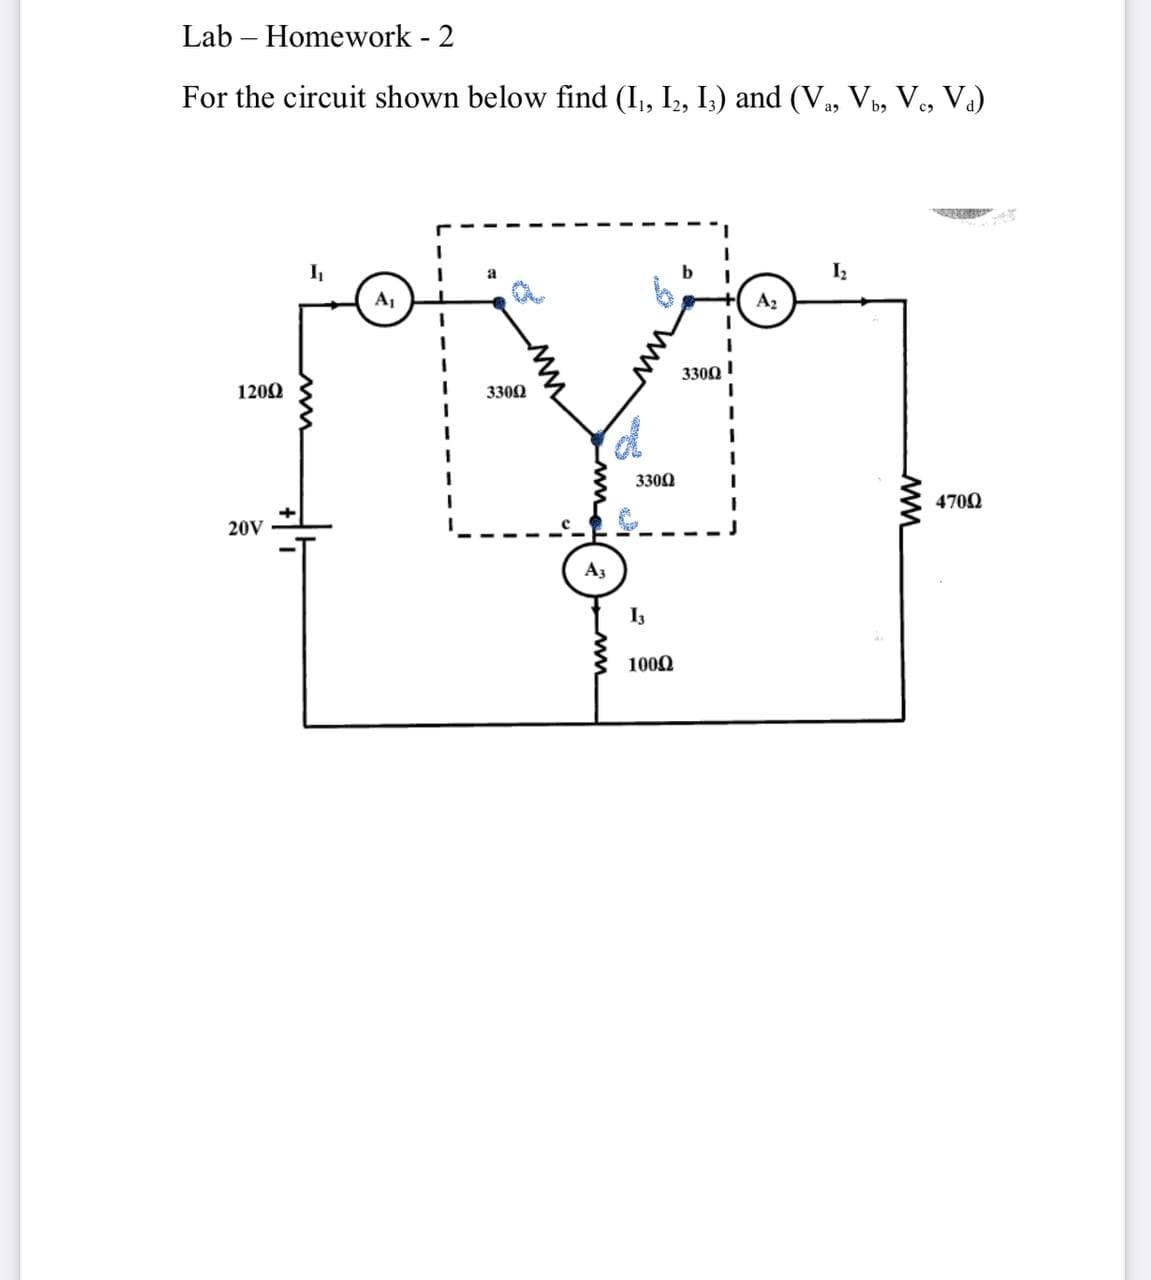 Lab – Homework - 2
For the circuit shown below find (I,, I2, I.) and (V, V, Ve, V.)
I
Iz
A,
A2
1200
3300 !
3300
3300
4700
20V
A3
I3
100Q
ww
